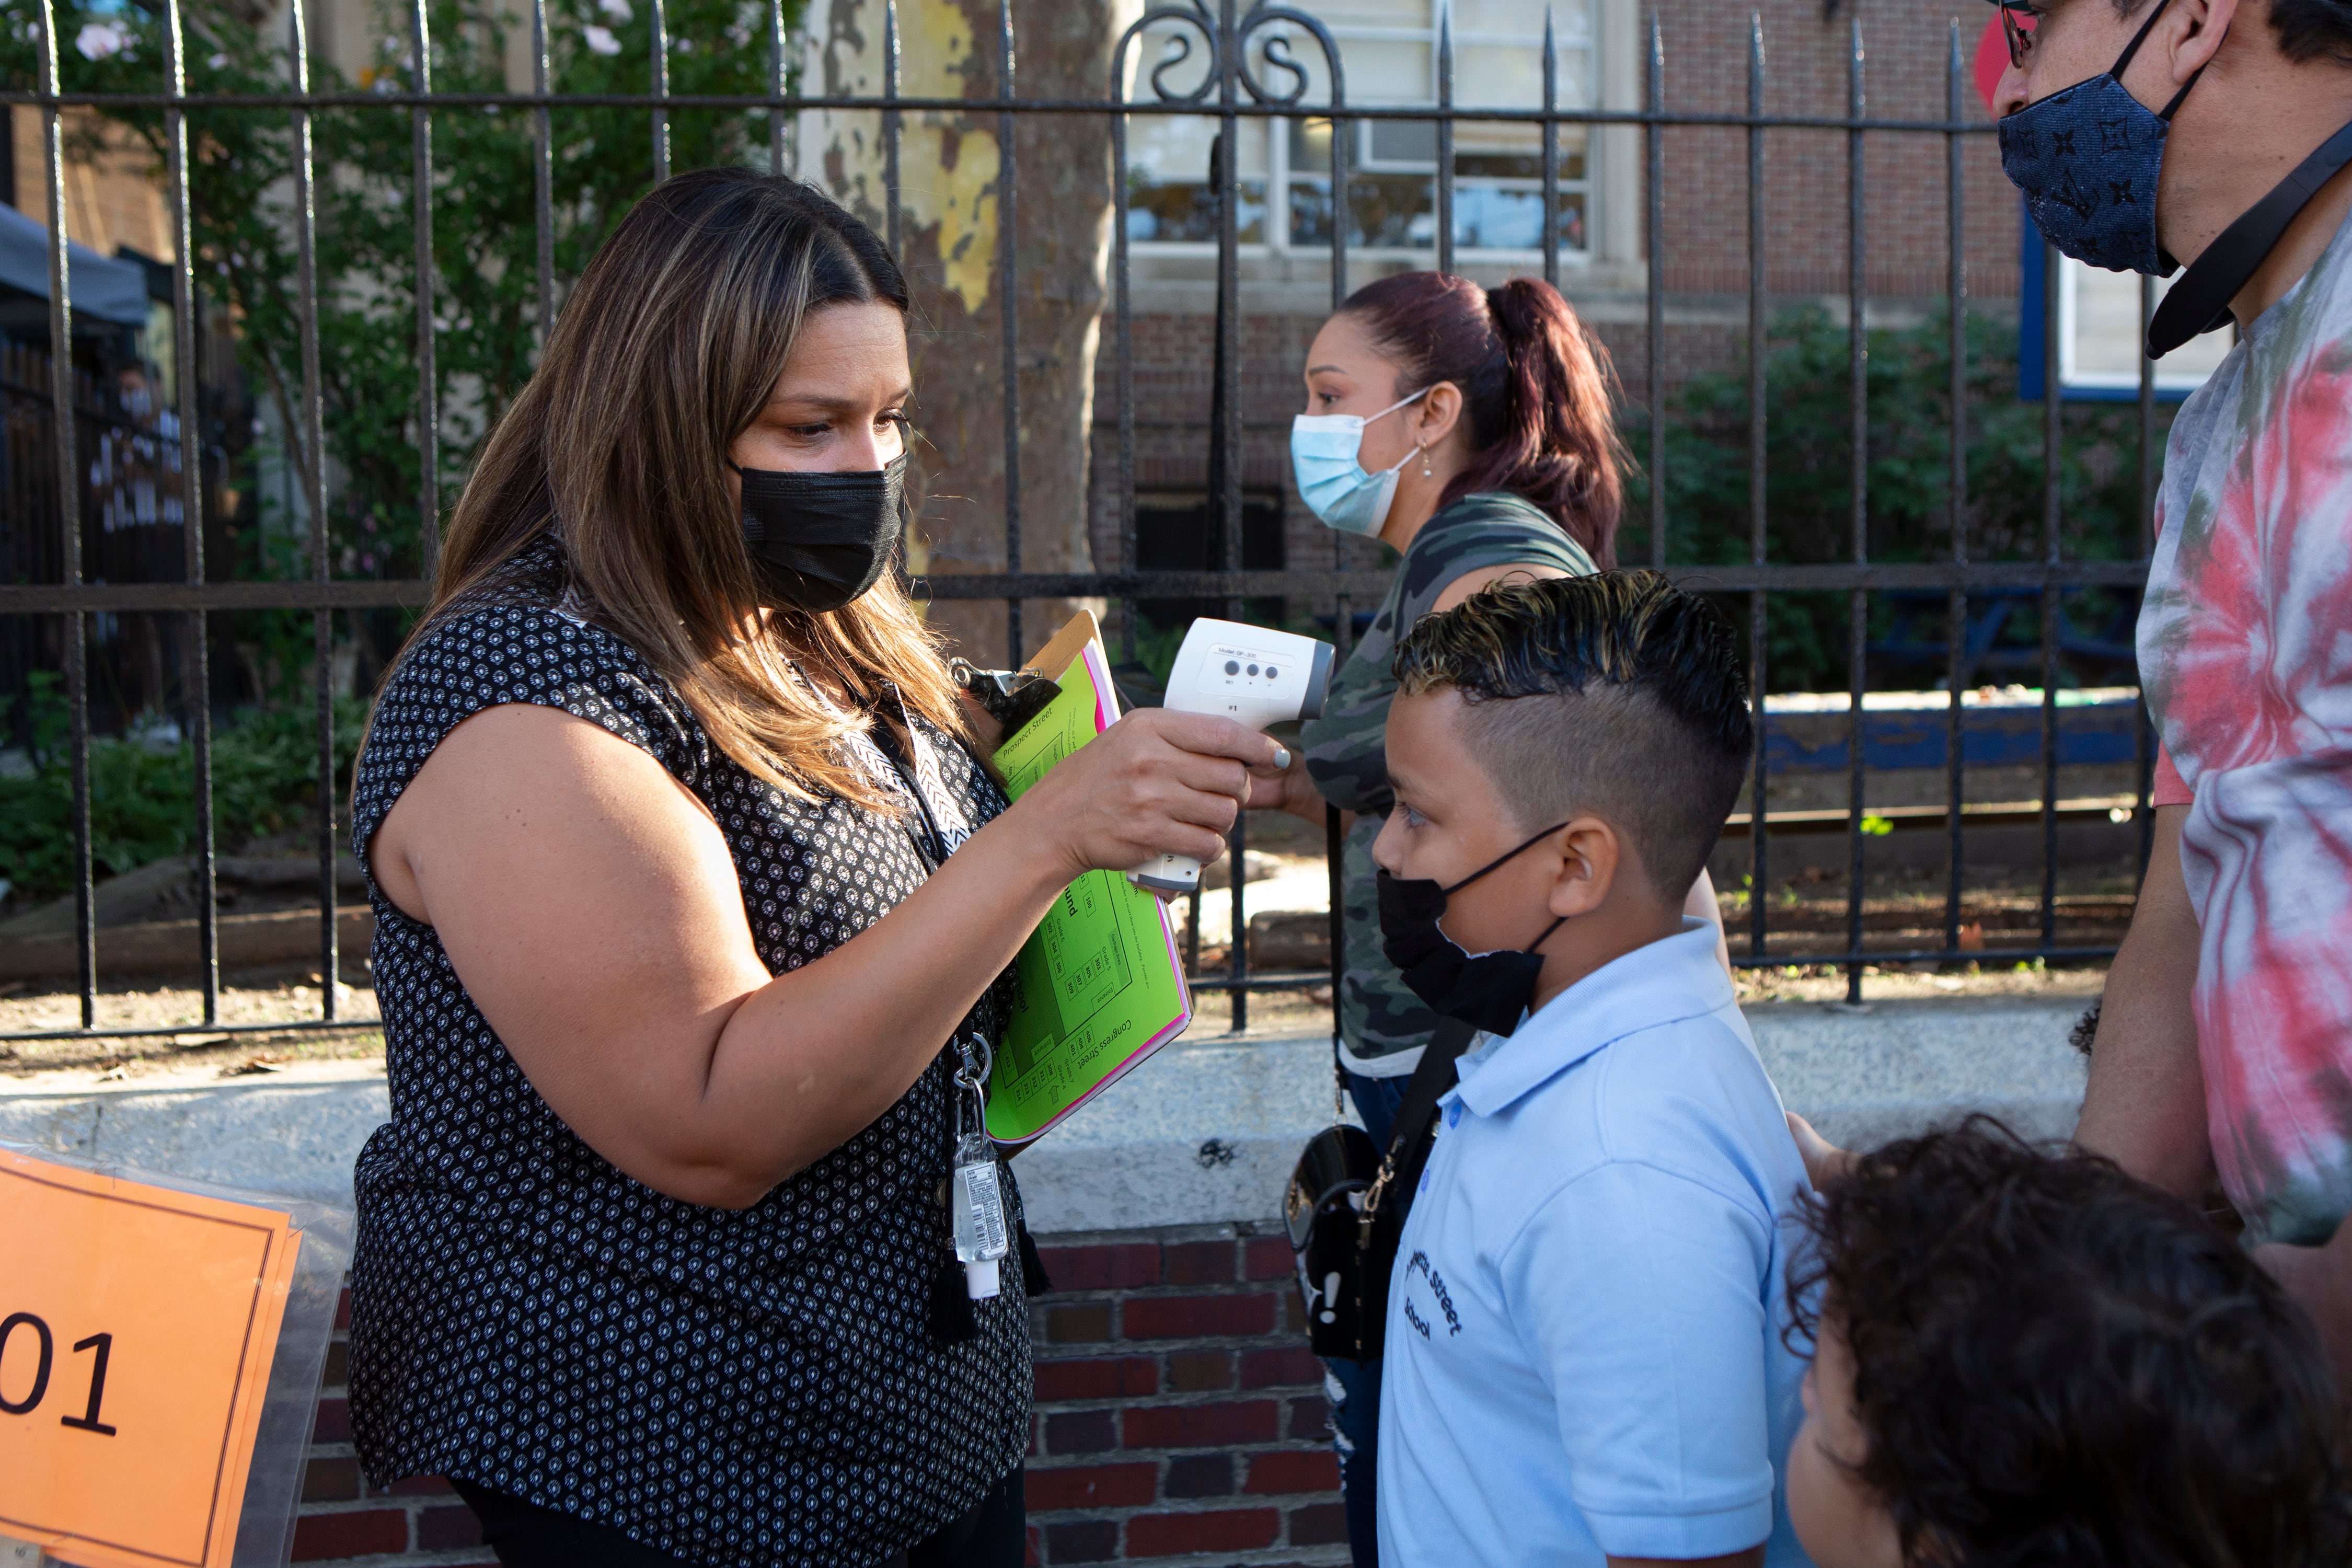 A woman checks a boy’s temperature with a digital thermometer as parents bring their students to school.